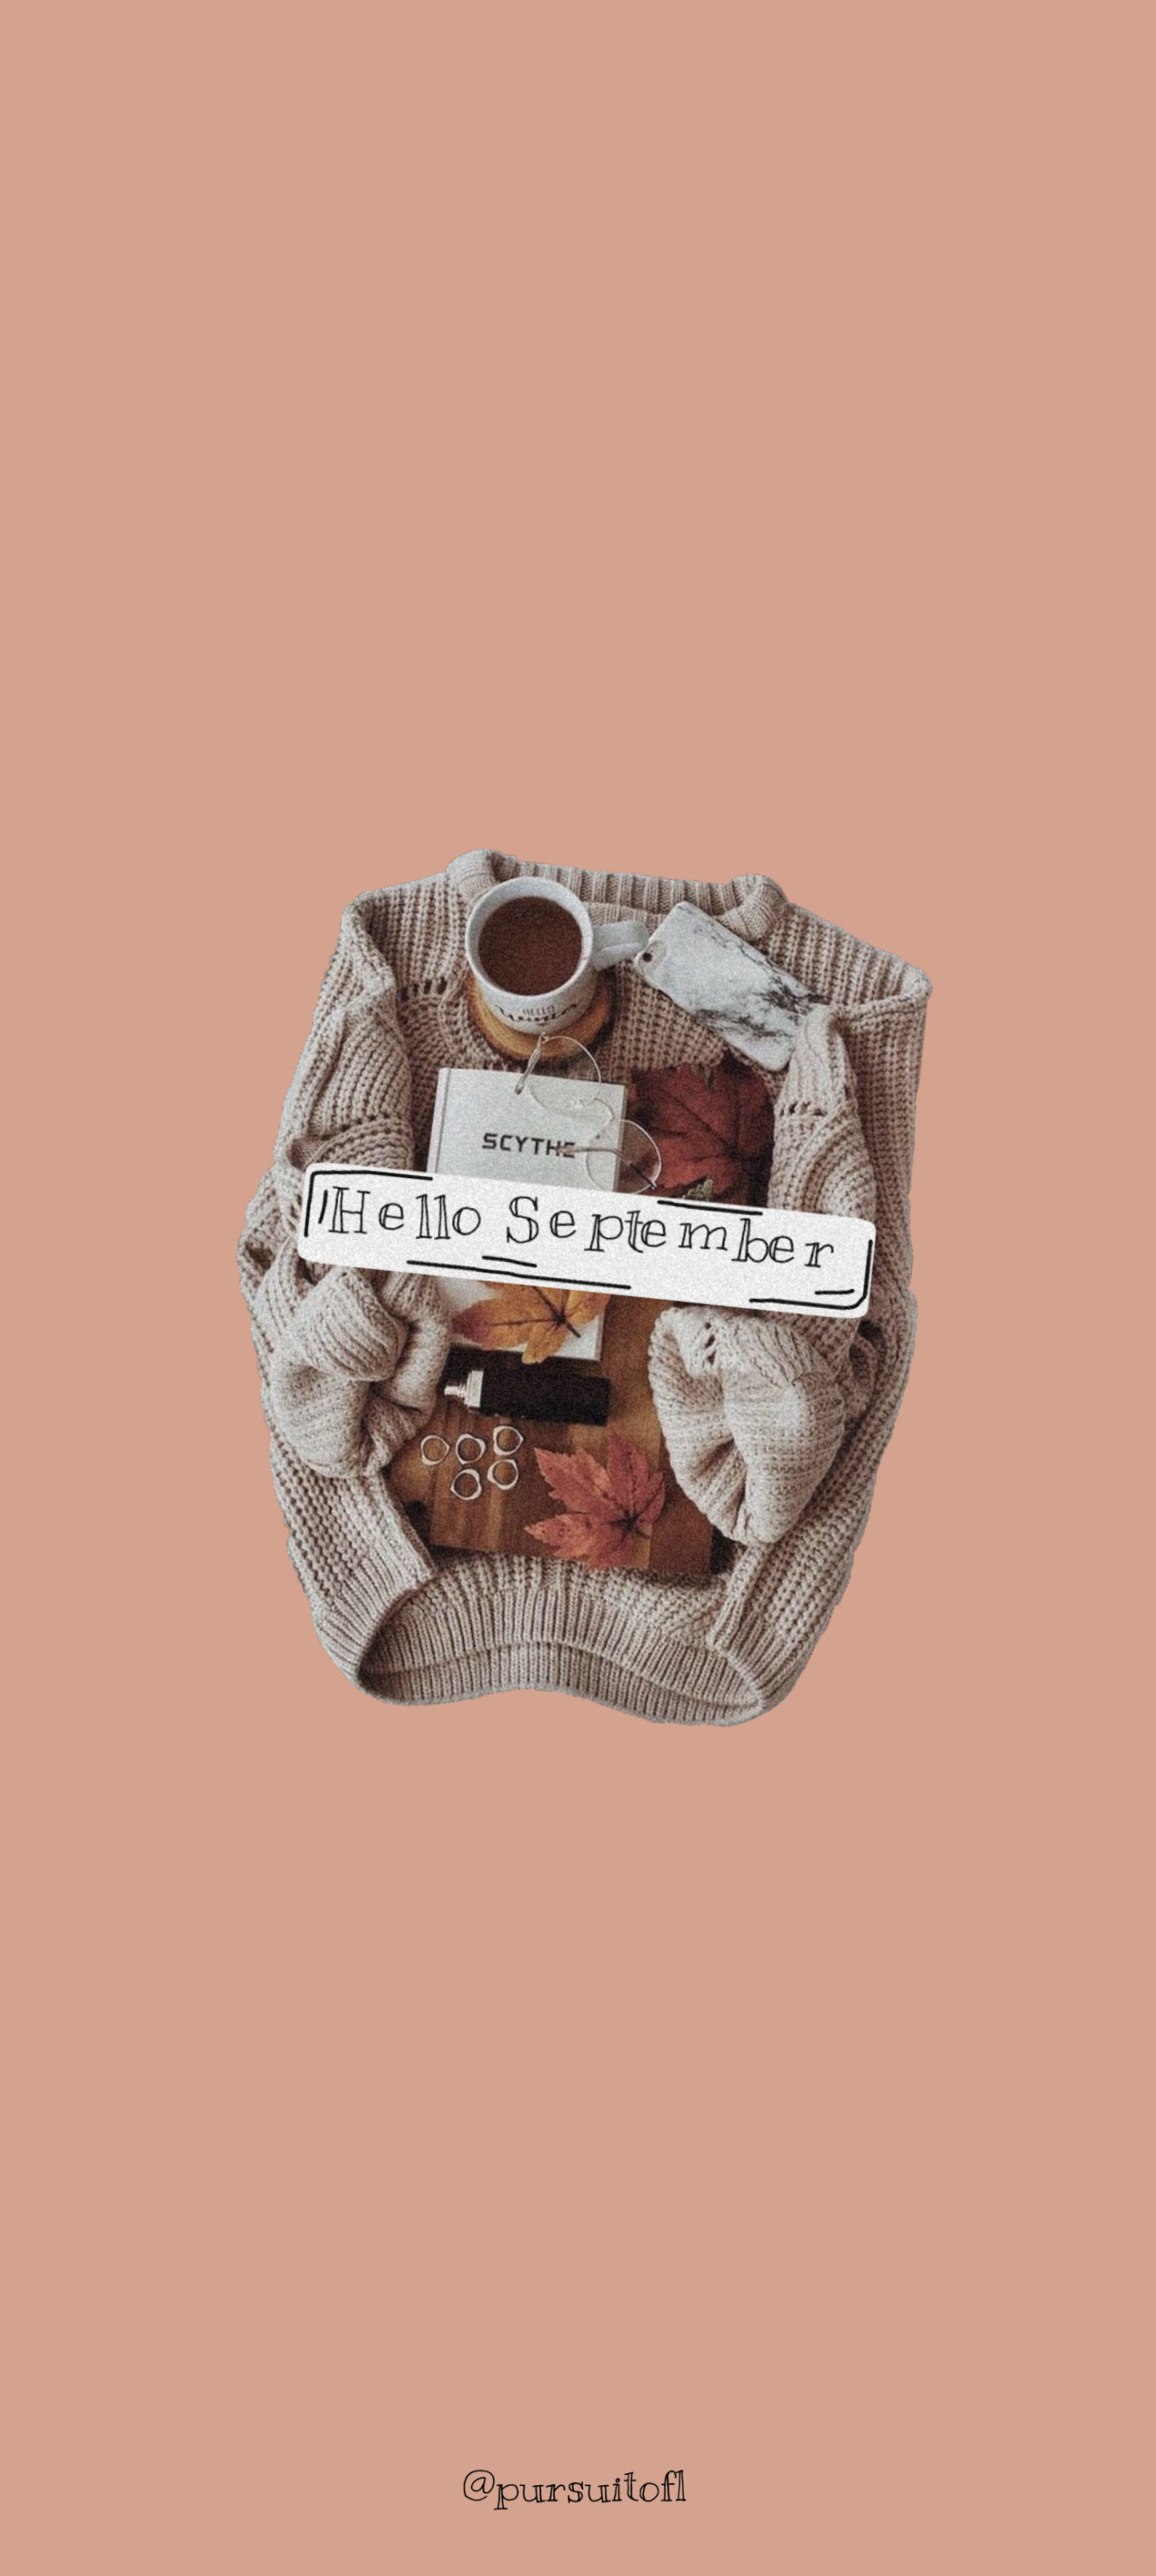 Tan phone wallpaper with sweater, fall aesthetic essentials and Hello September text